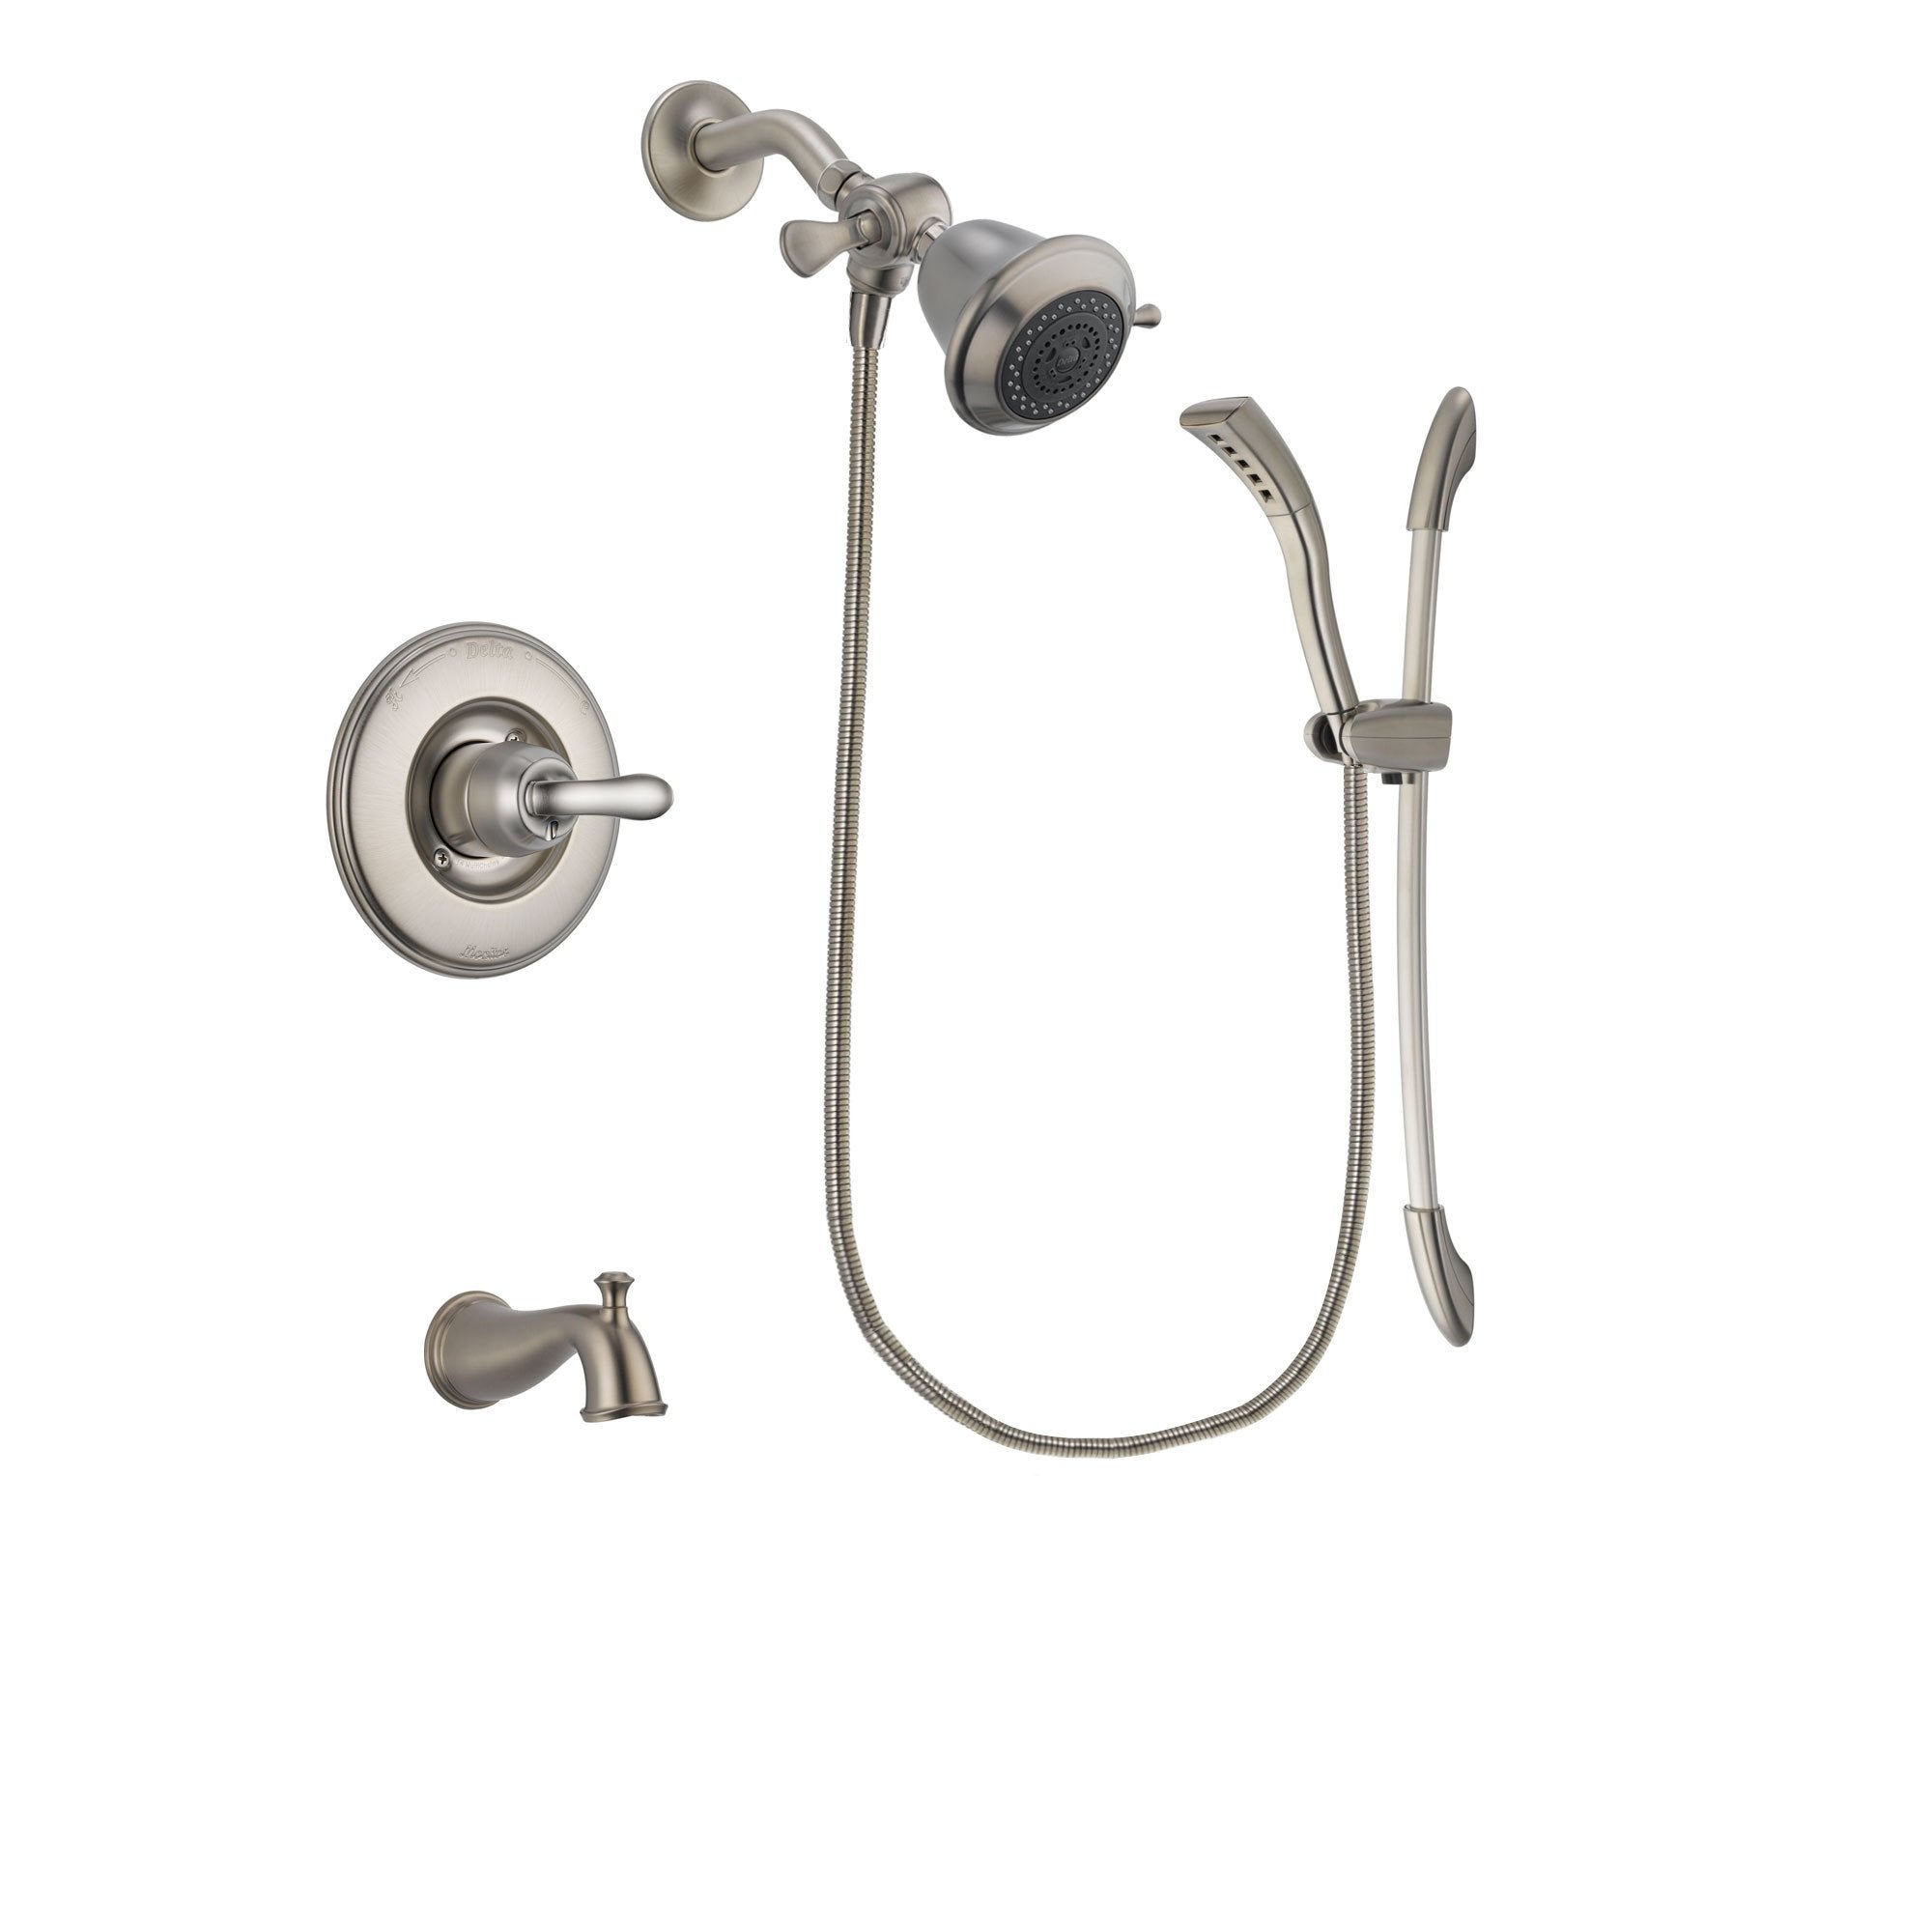 Delta Linden Stainless Steel Finish Tub and Shower Faucet System Package with Shower Head and Handshower with Slide Bar Includes Rough-in Valve and Tub Spout DSP1395V